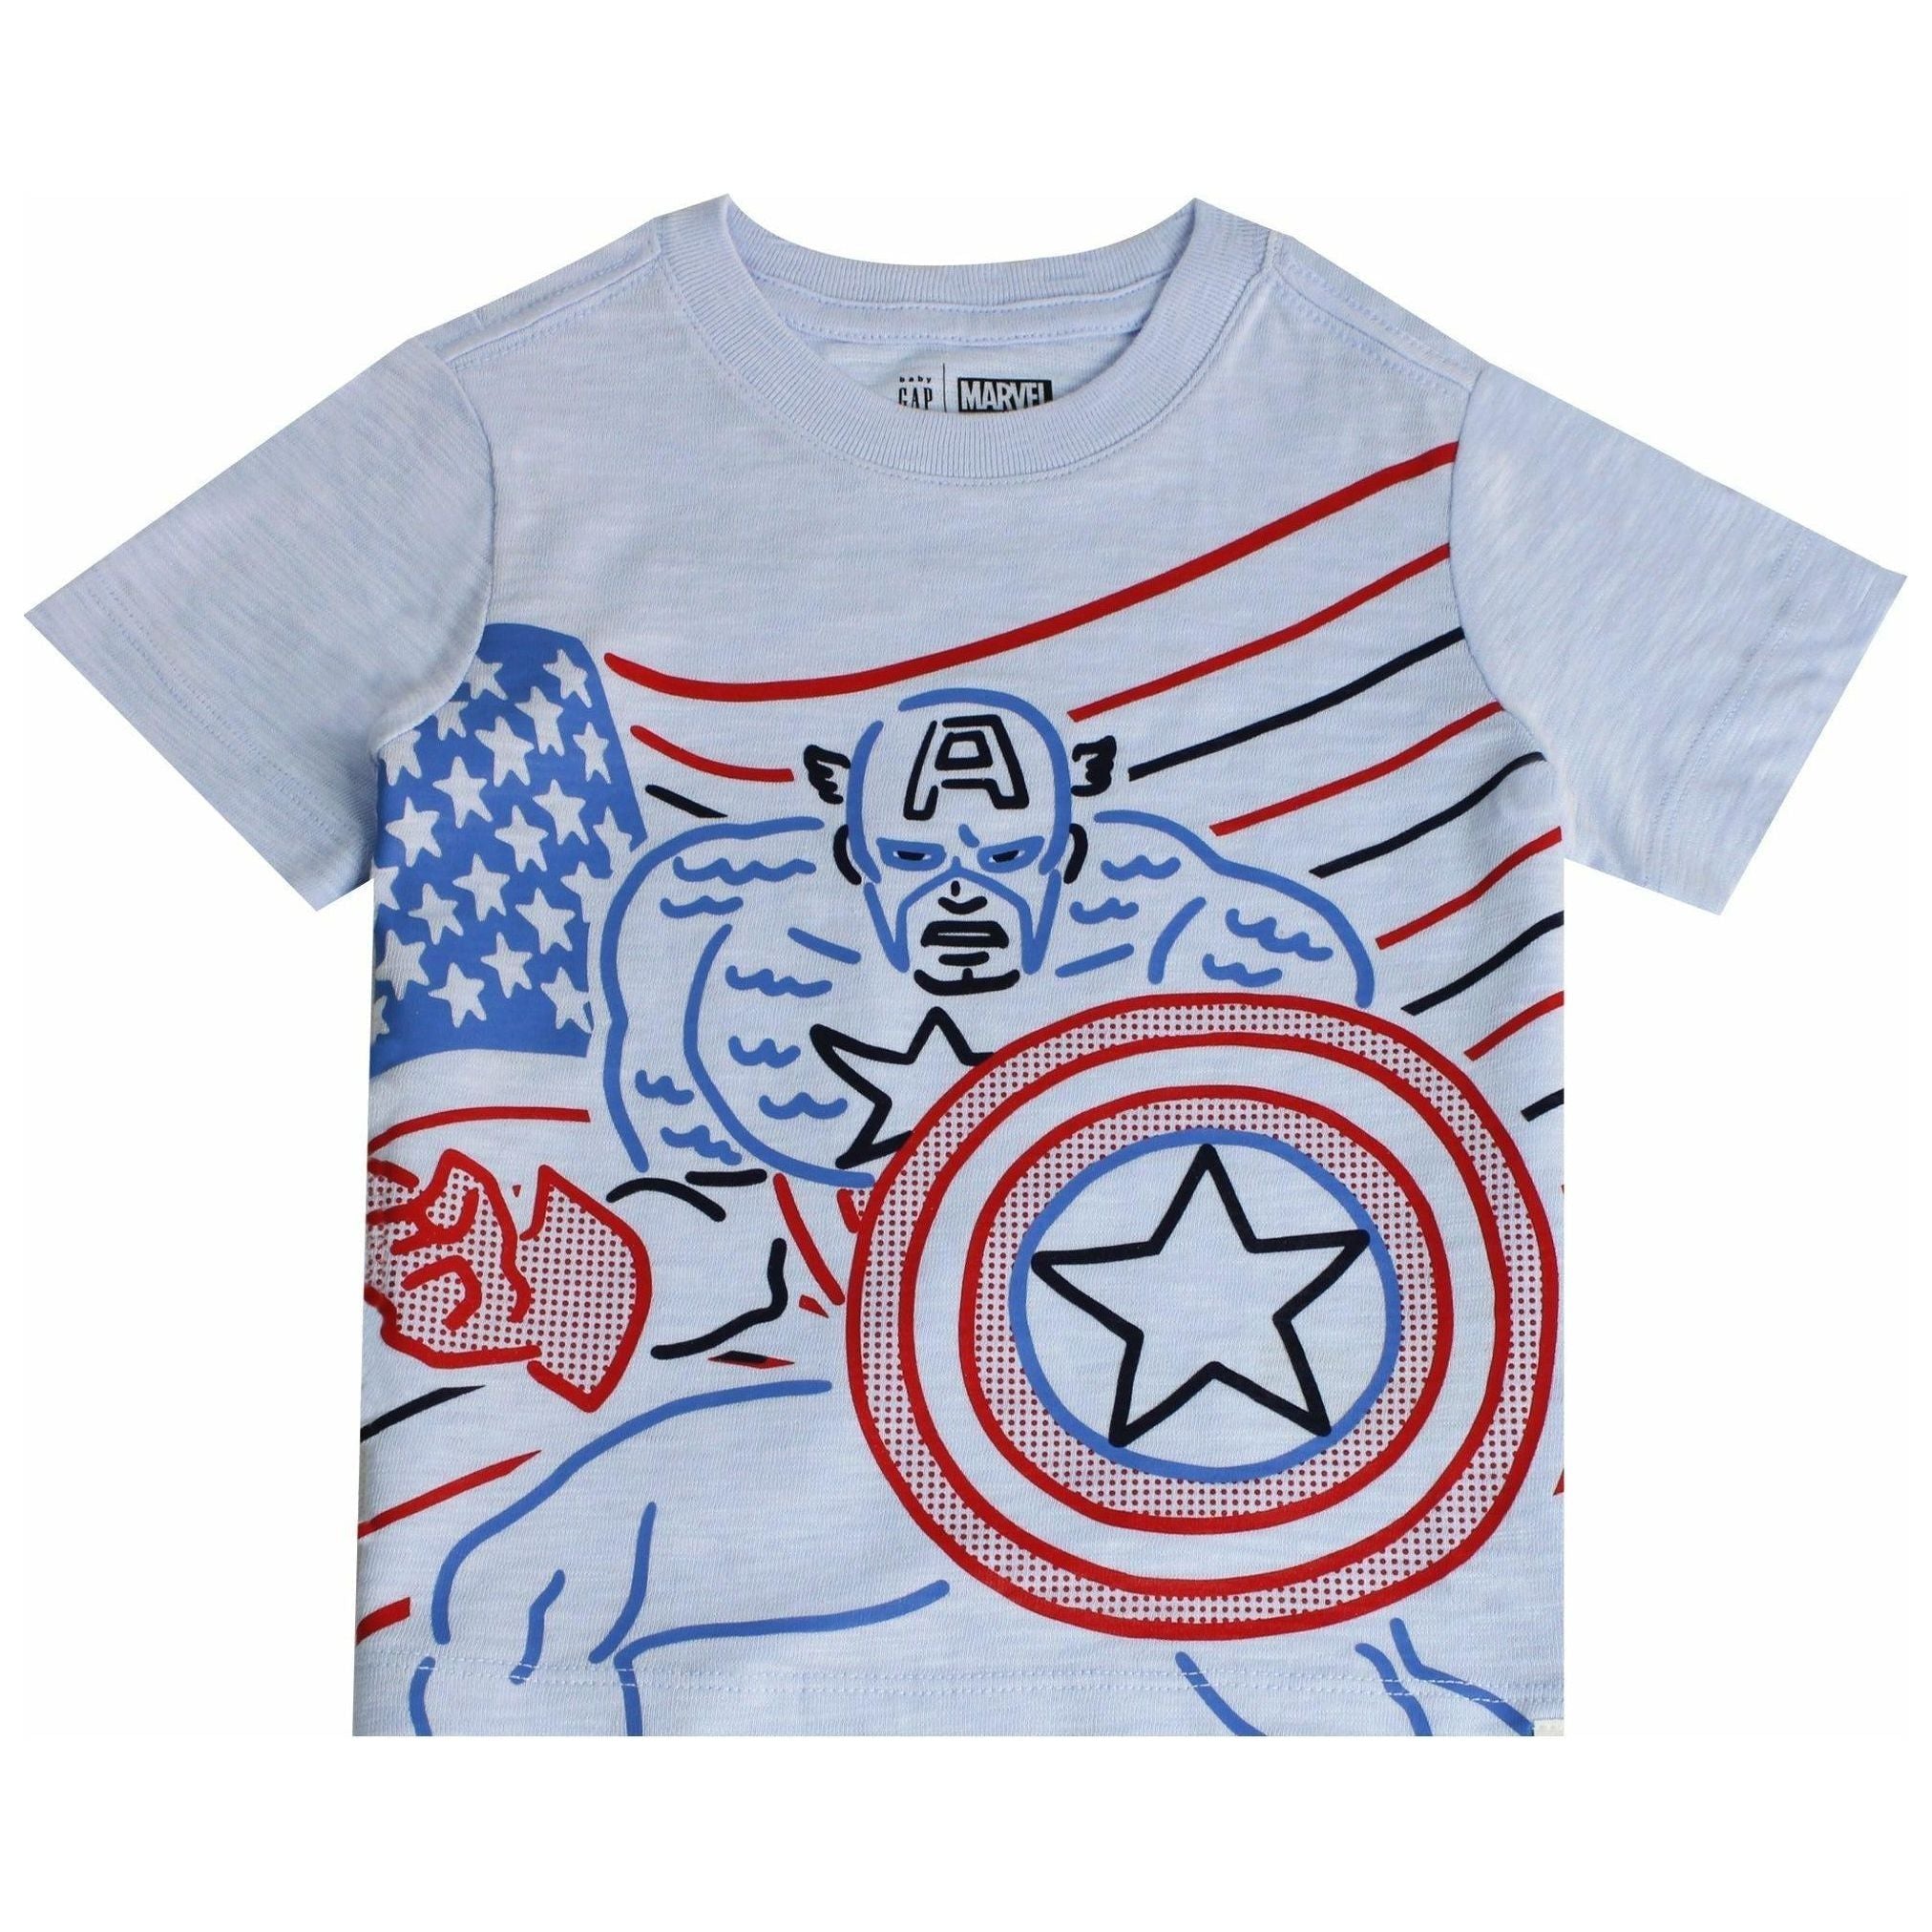 GAP Marvel 100% Organic Cotton Baby Blue T-Shirt For Kids Size 2 Years - BumbleToys - 2-4 Years, Boys, Clothing, Kids Fashion, Marvel, OXE, T-shirt